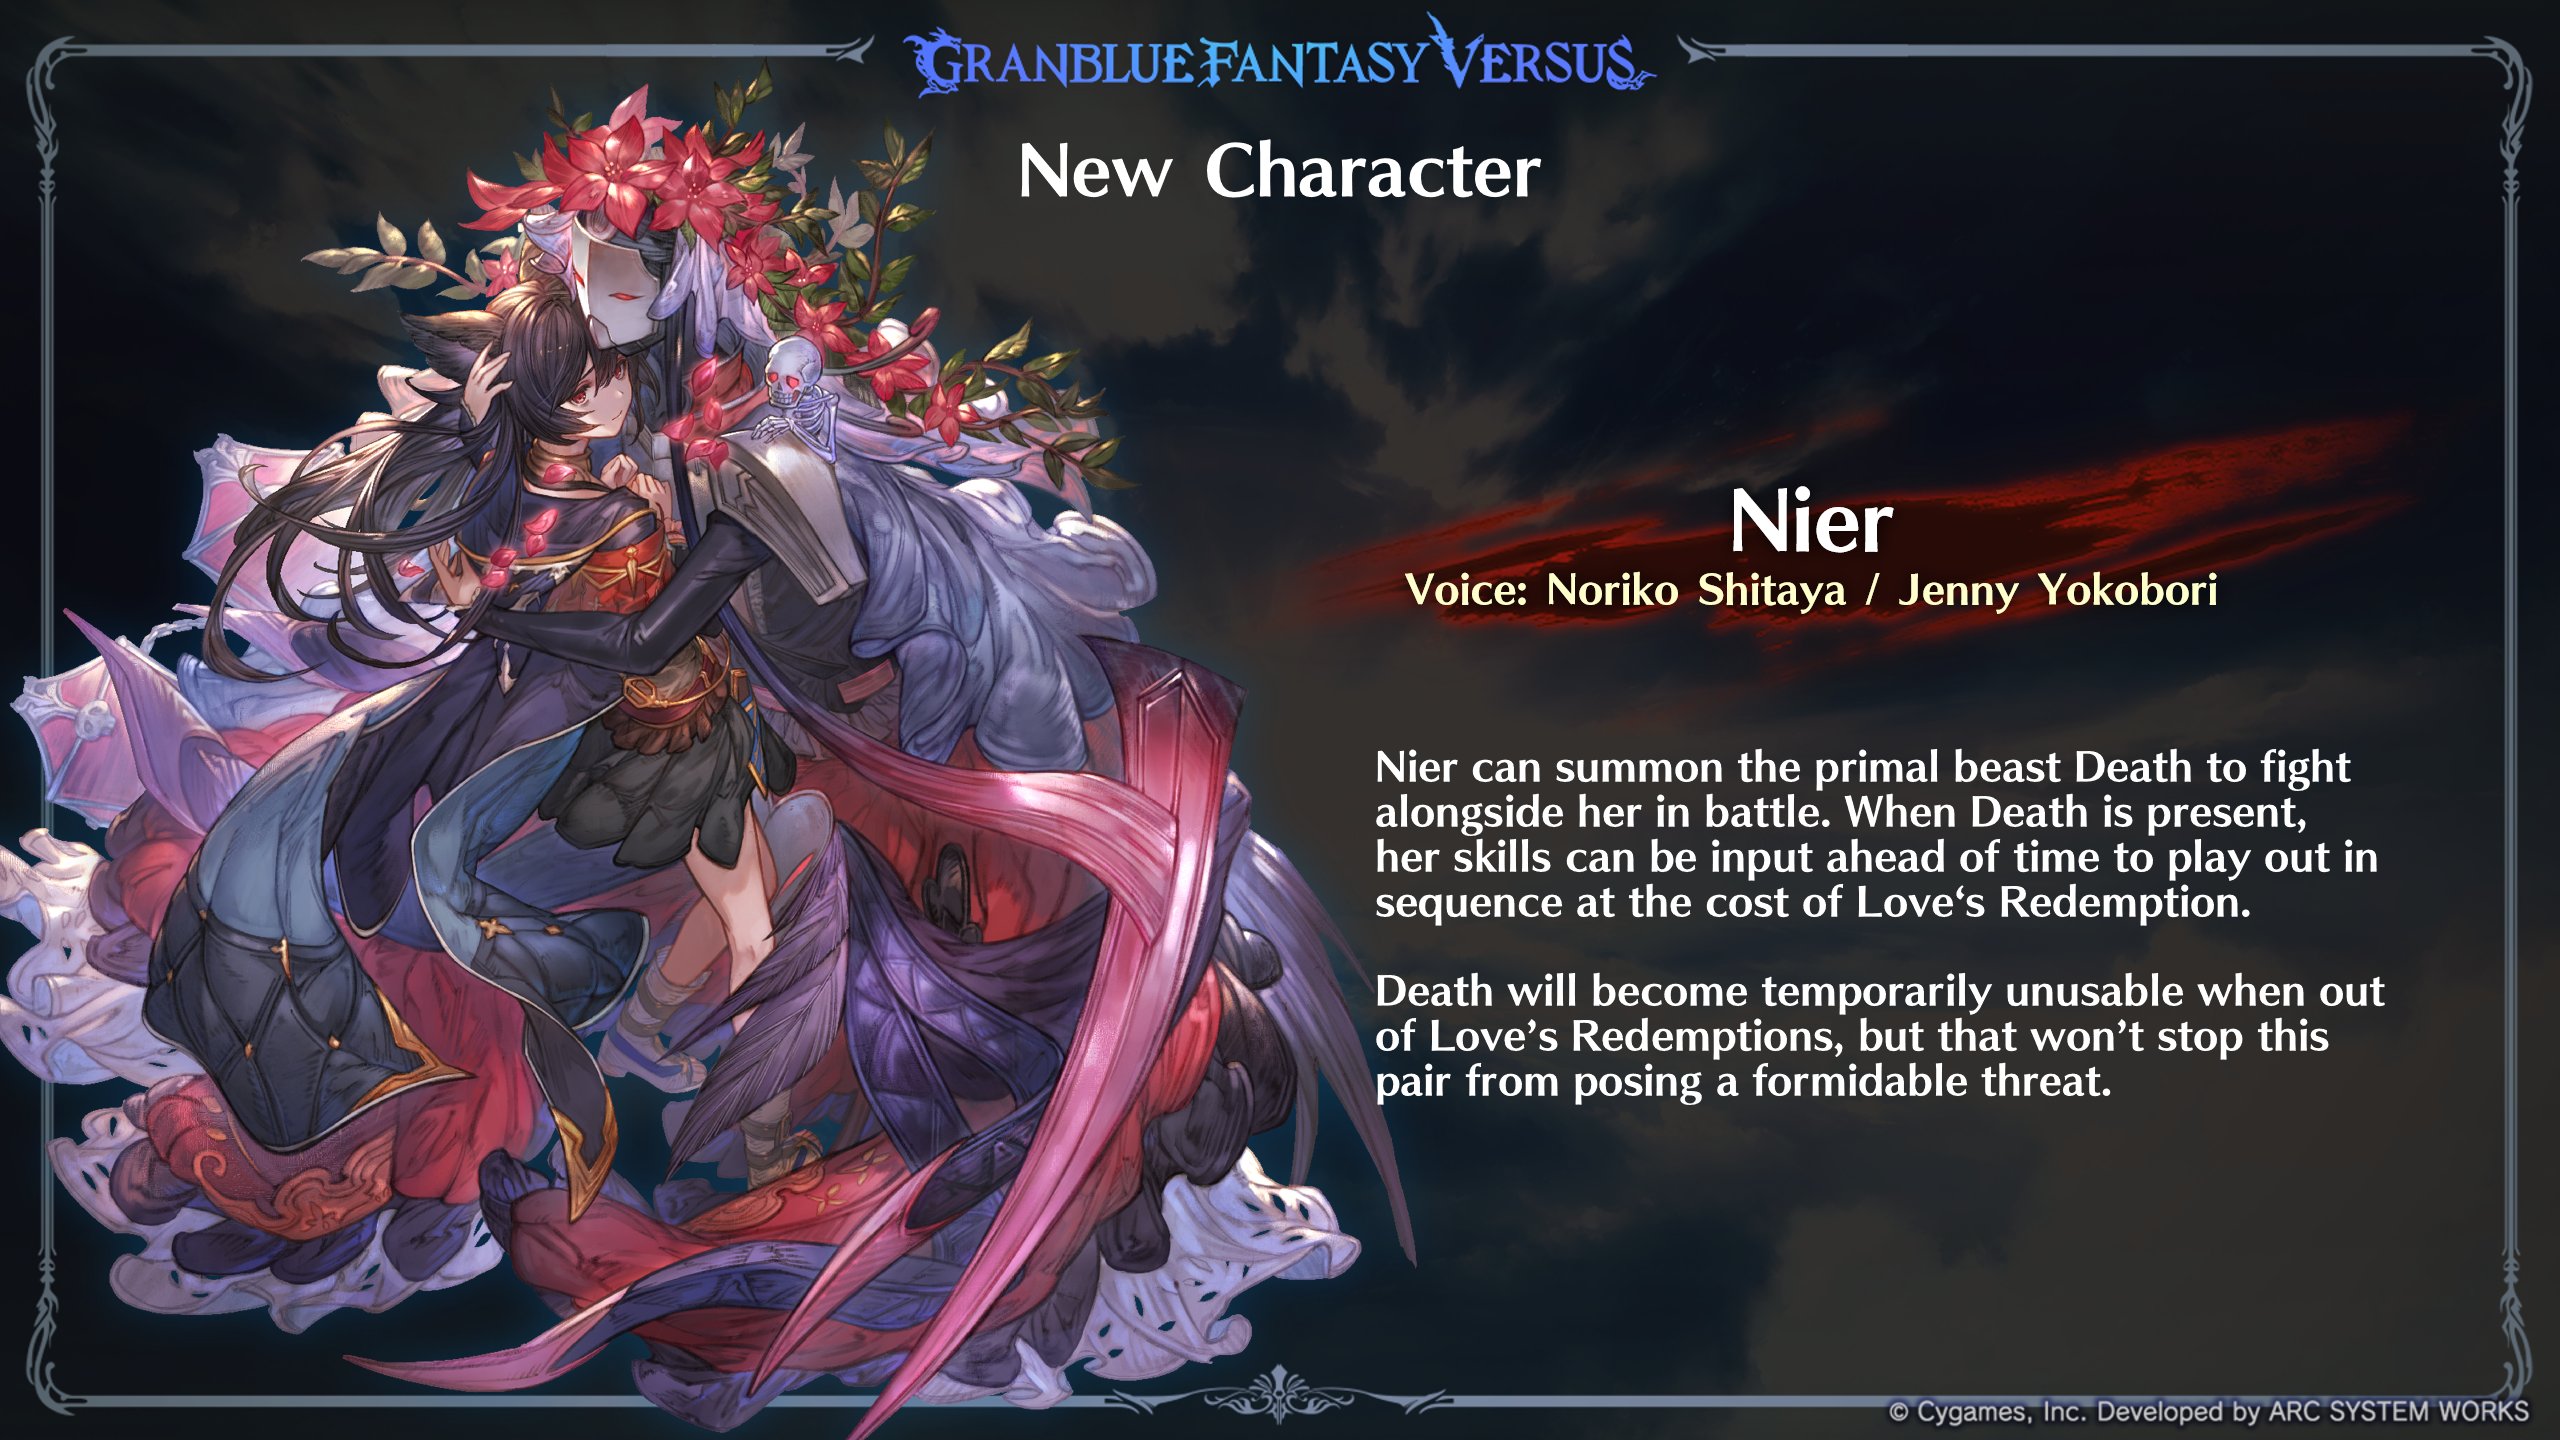 Cygames on X: ""You don't understand me either? Then... Goodbye." Nier is the latest new playable character announced for Granblue Fantasy Versus: Rising! Fight in tandem with the primal beast Death to